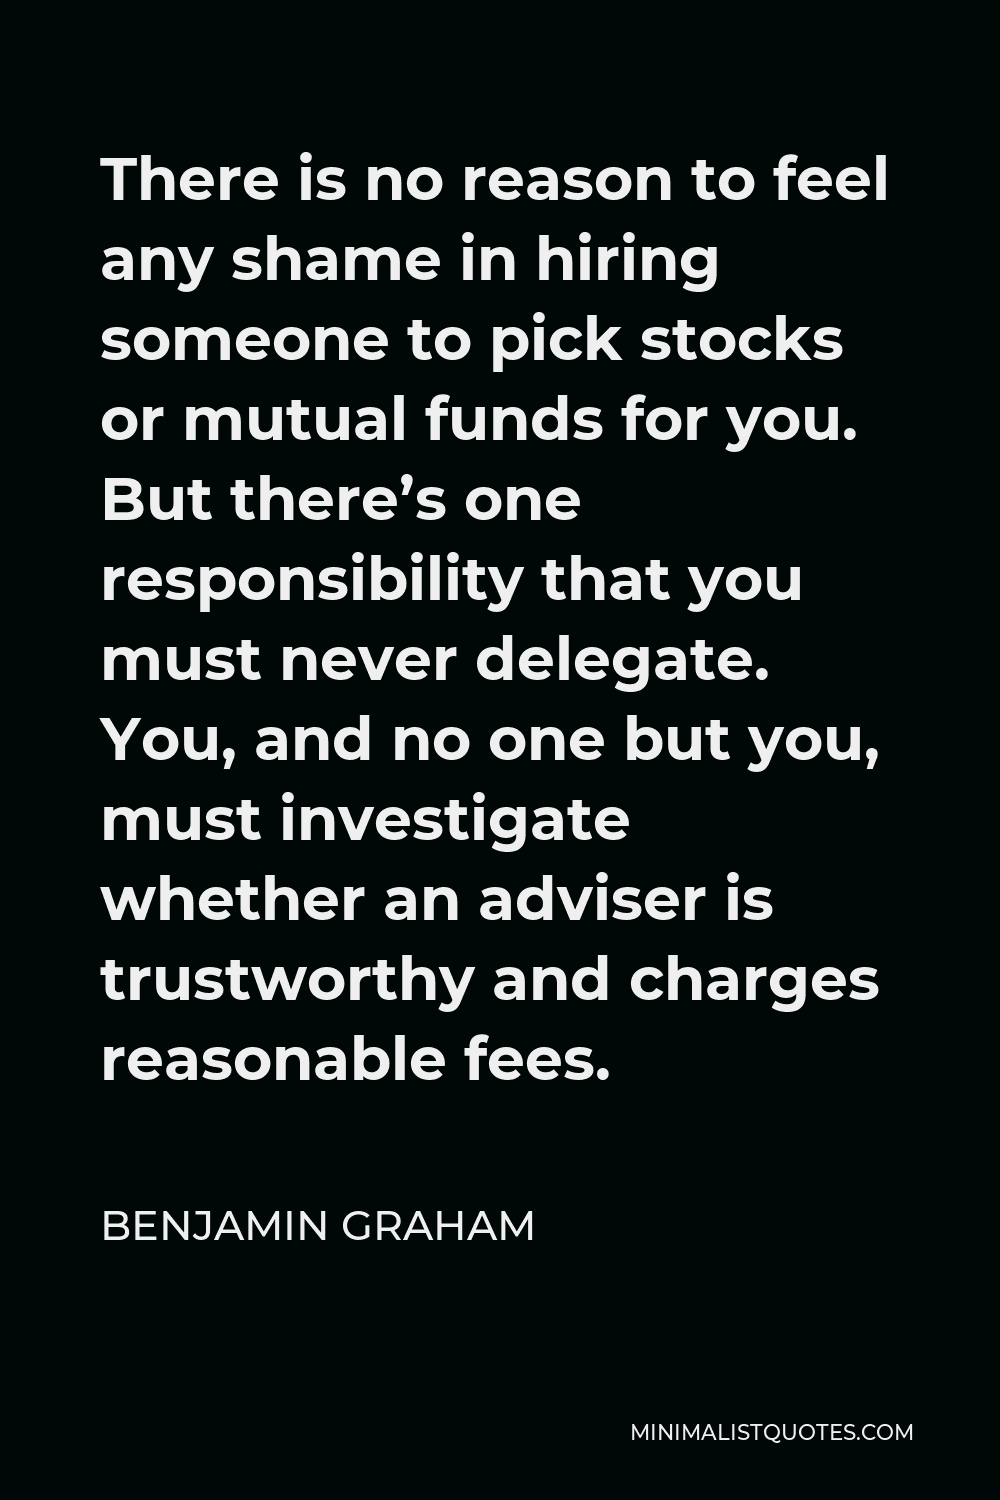 Benjamin Graham Quote - There is no reason to feel any shame in hiring someone to pick stocks or mutual funds for you. But there’s one responsibility that you must never delegate. You, and no one but you, must investigate whether an adviser is trustworthy and charges reasonable fees.